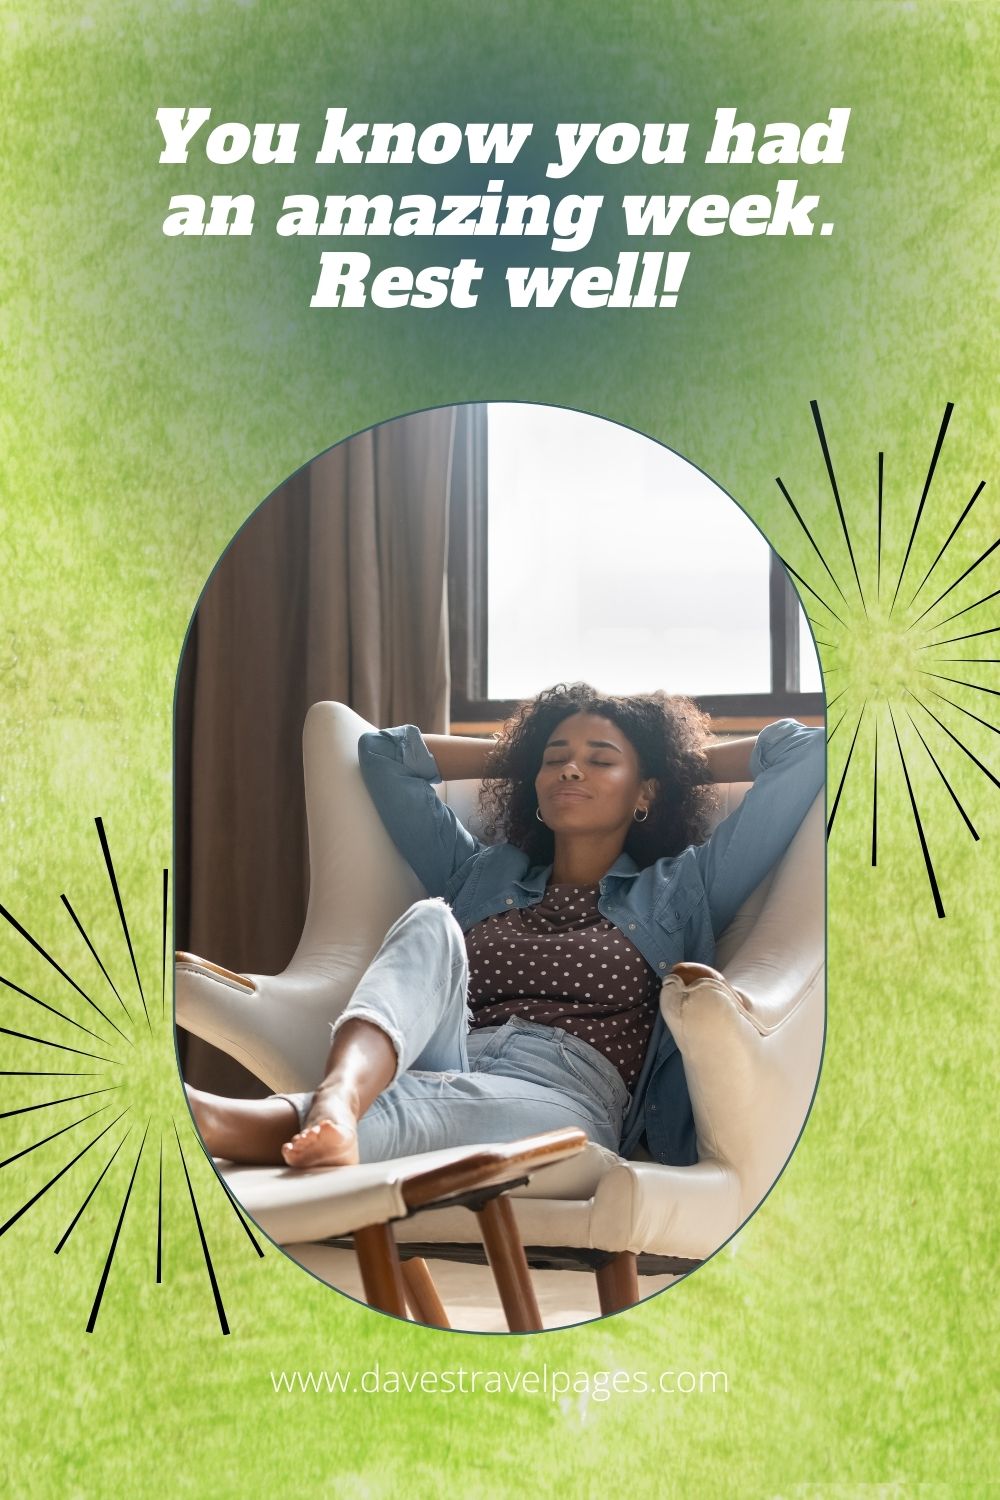 You know you had an amazing week. Rest well!